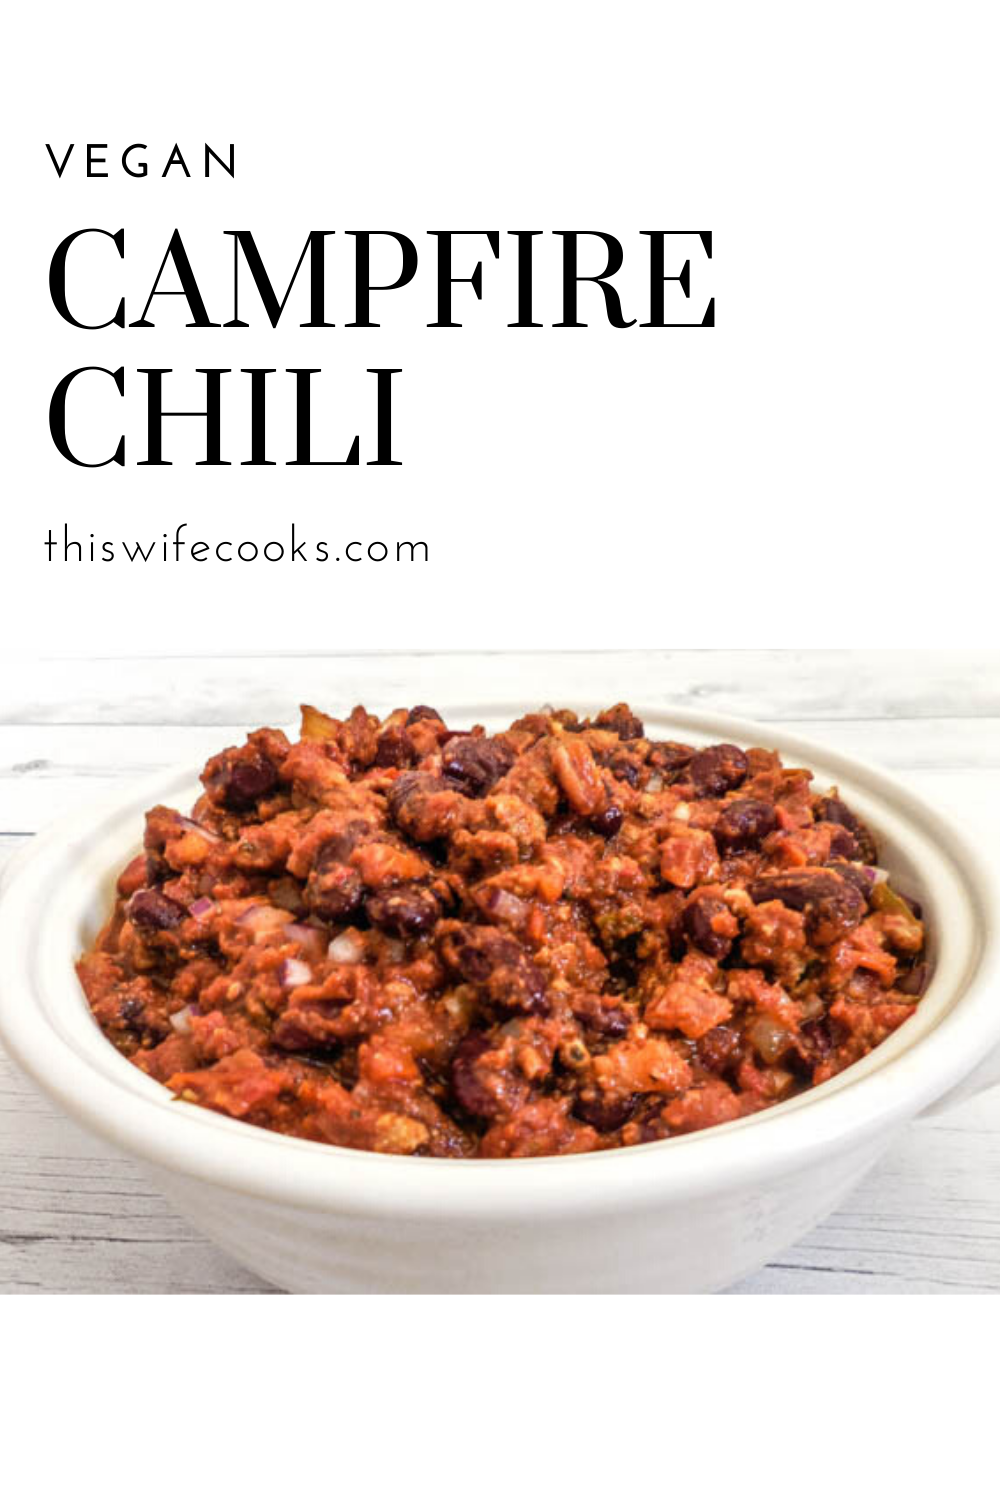 Vegan Campfire Chili + Homemade Chili Seasoning - A hearty and spicy vegan chili that is sure to warm you up on a cold night! Also includes recipe for Homemade Chili Seasoning! via @thiswifecooks